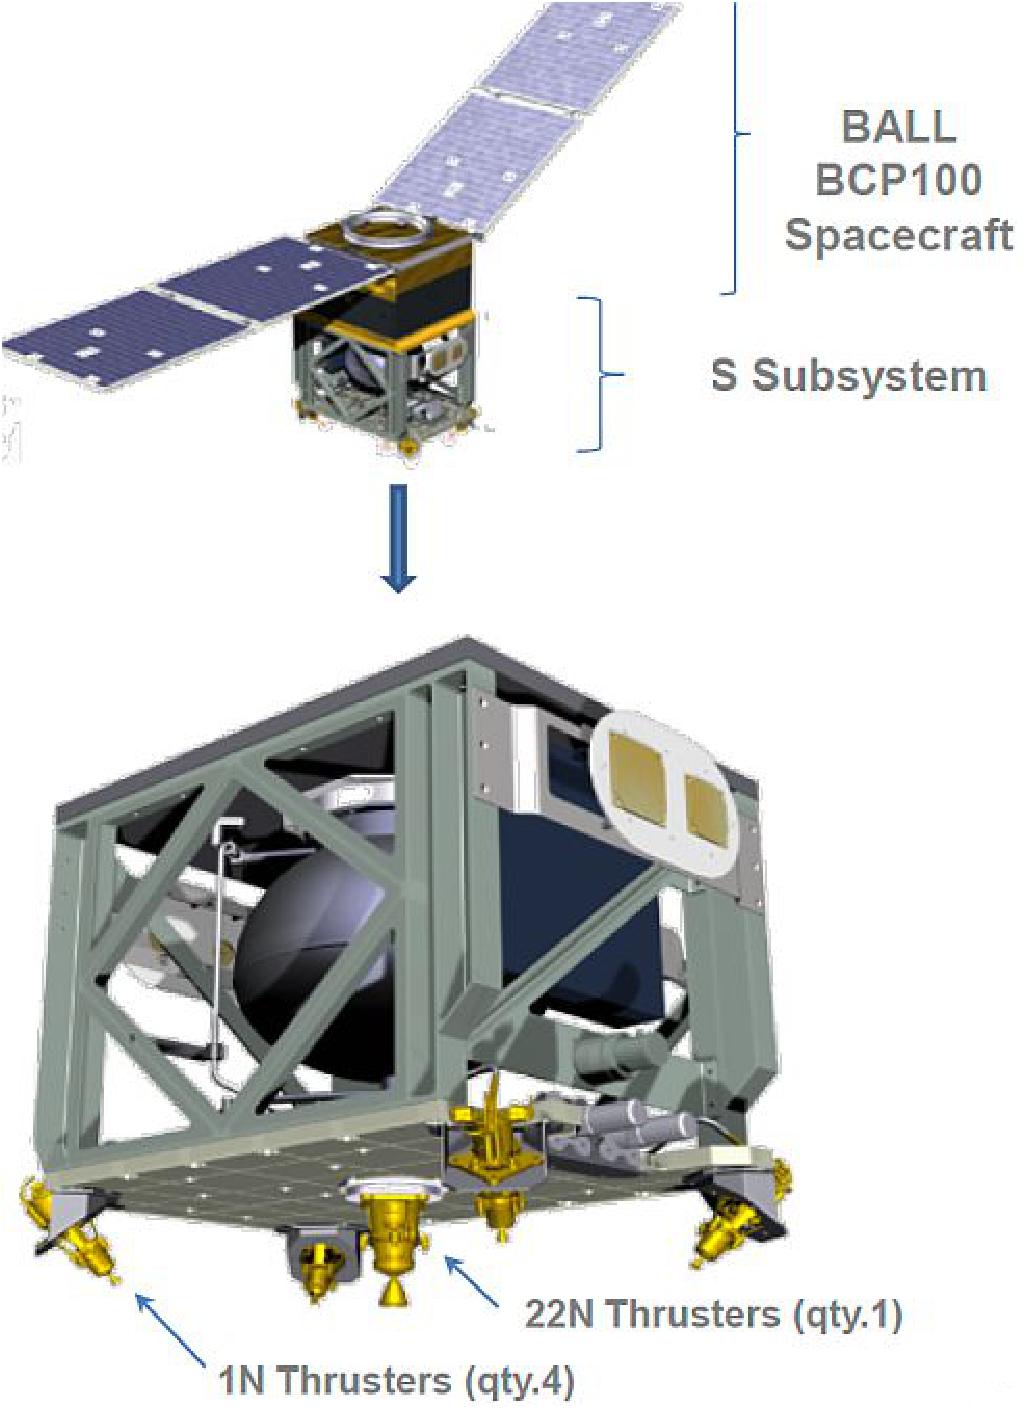 Figure 3: Schematic view of the GPIM spacecraft (top) and the thruster assembly (bottom) of the AF-M315E propulsion system (image credit: NASA)